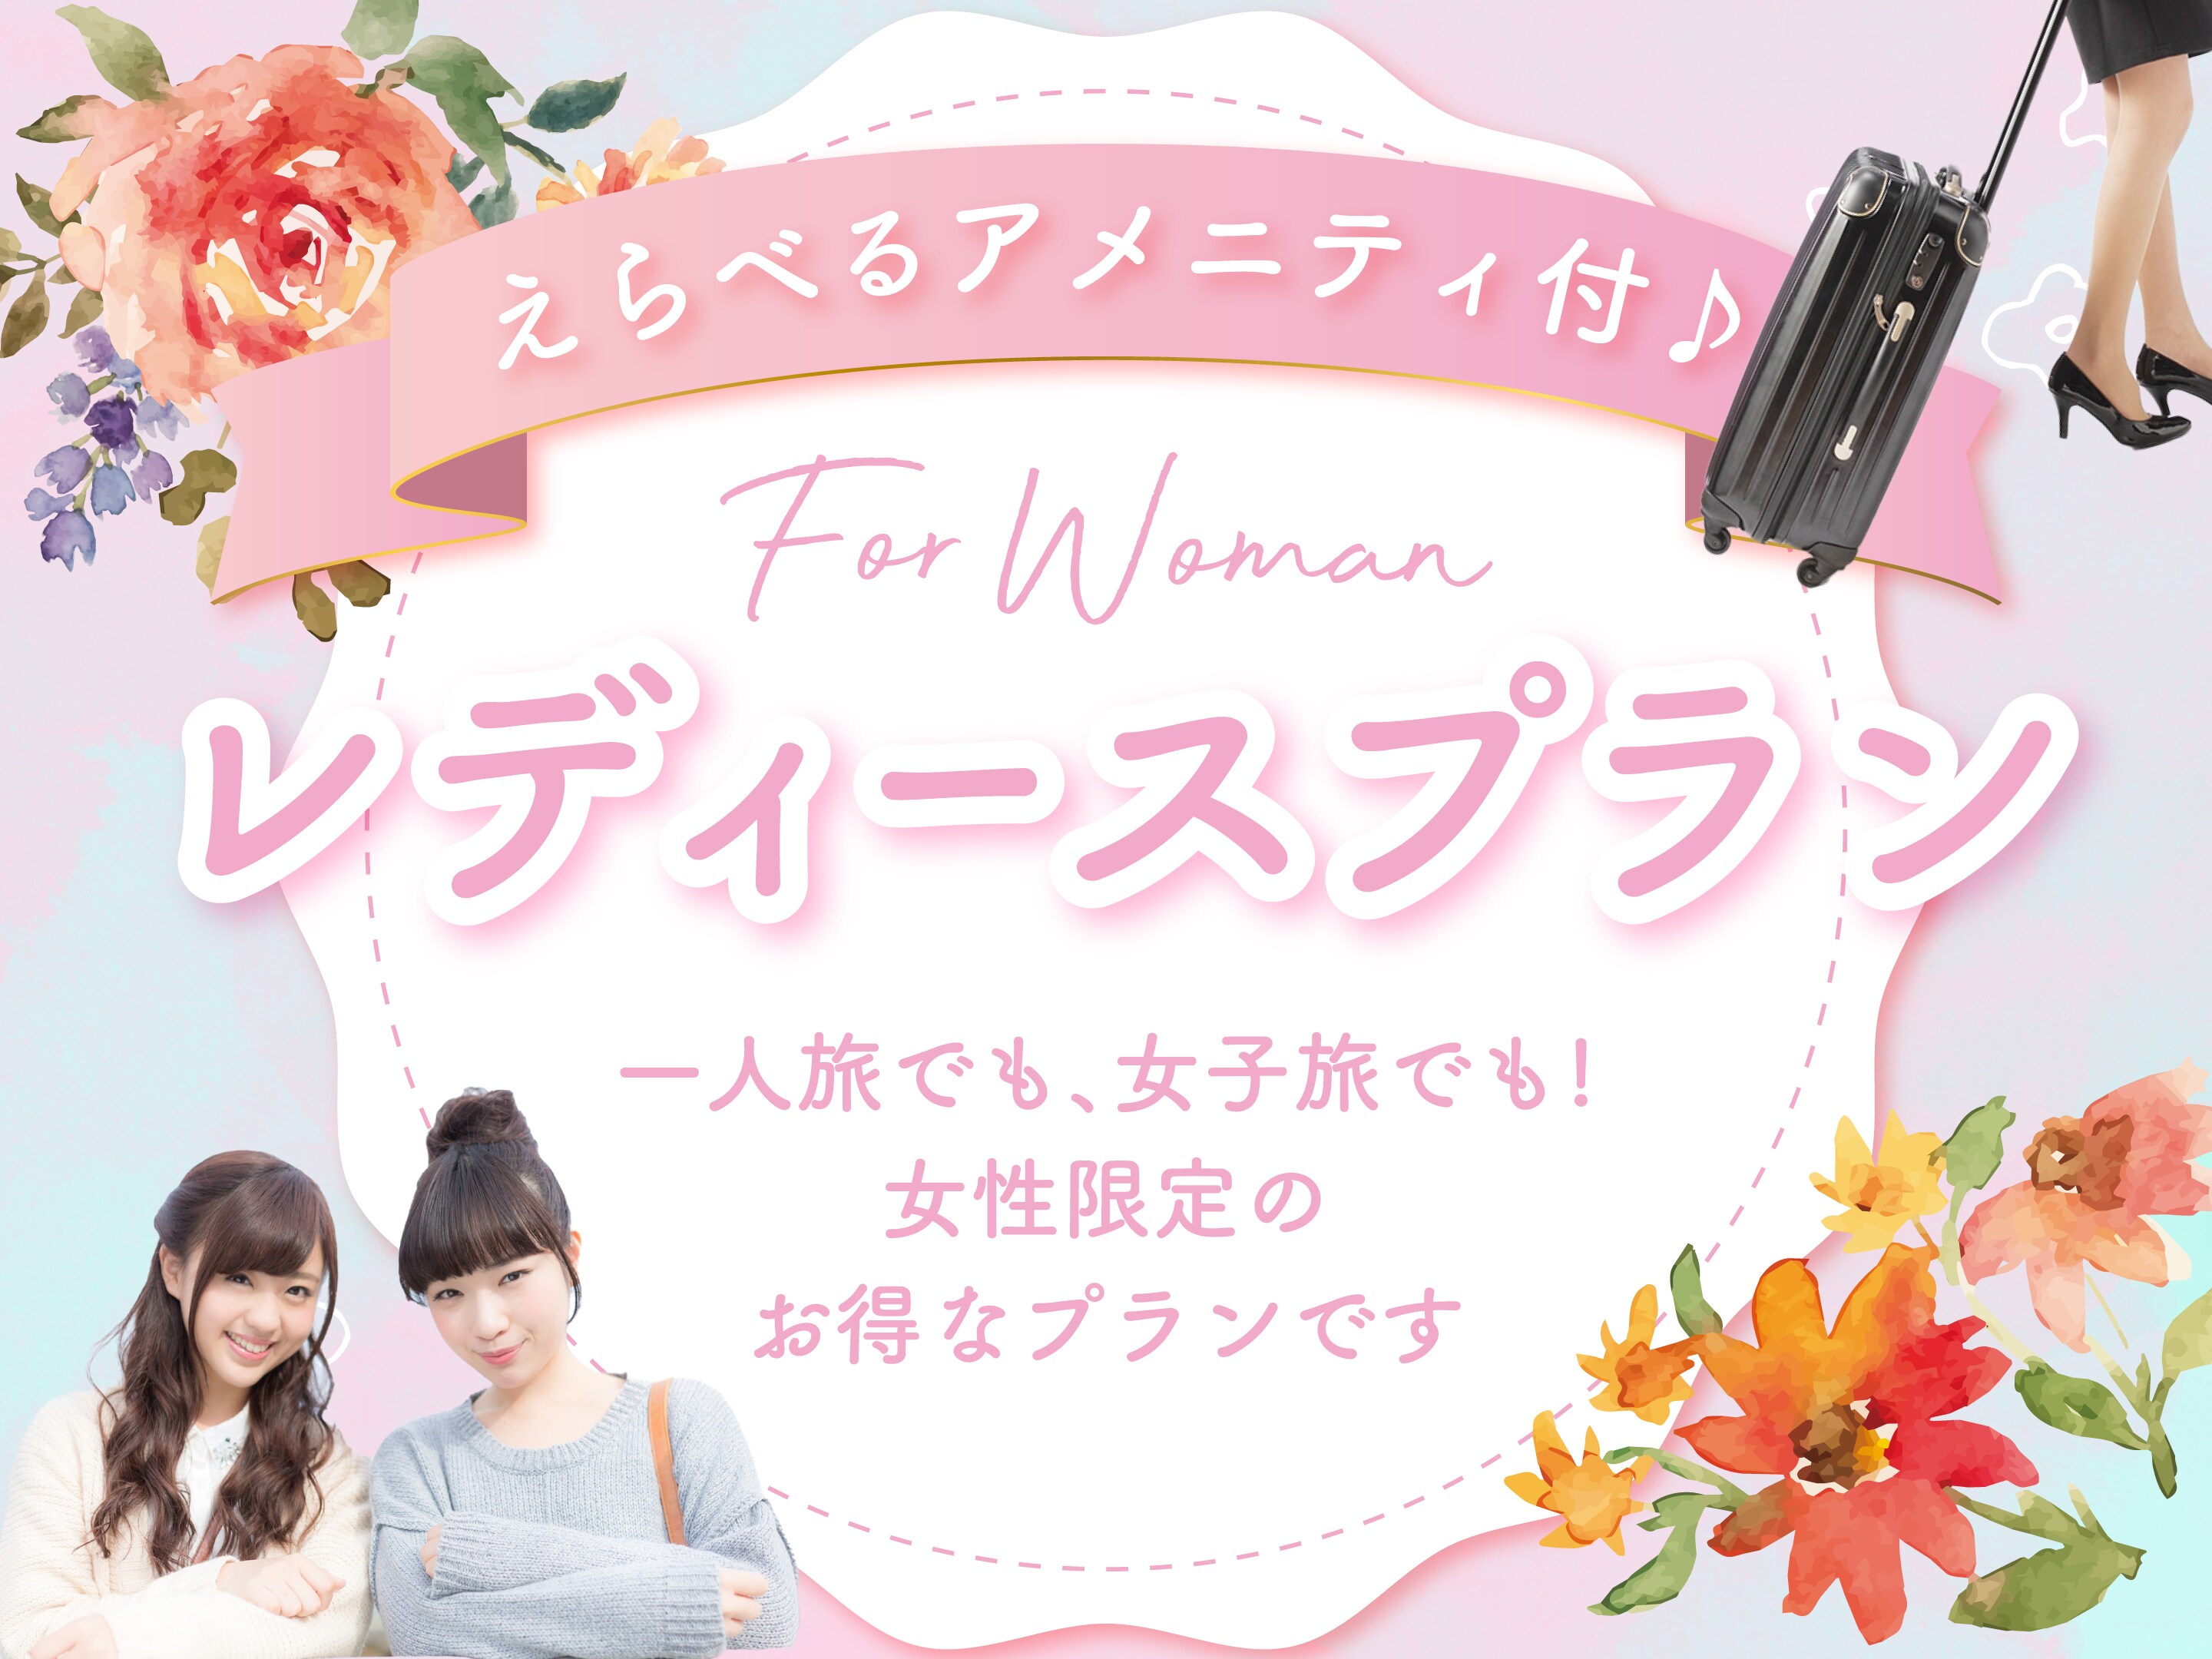 ● With selectable amenities ♪ Ladies' plan